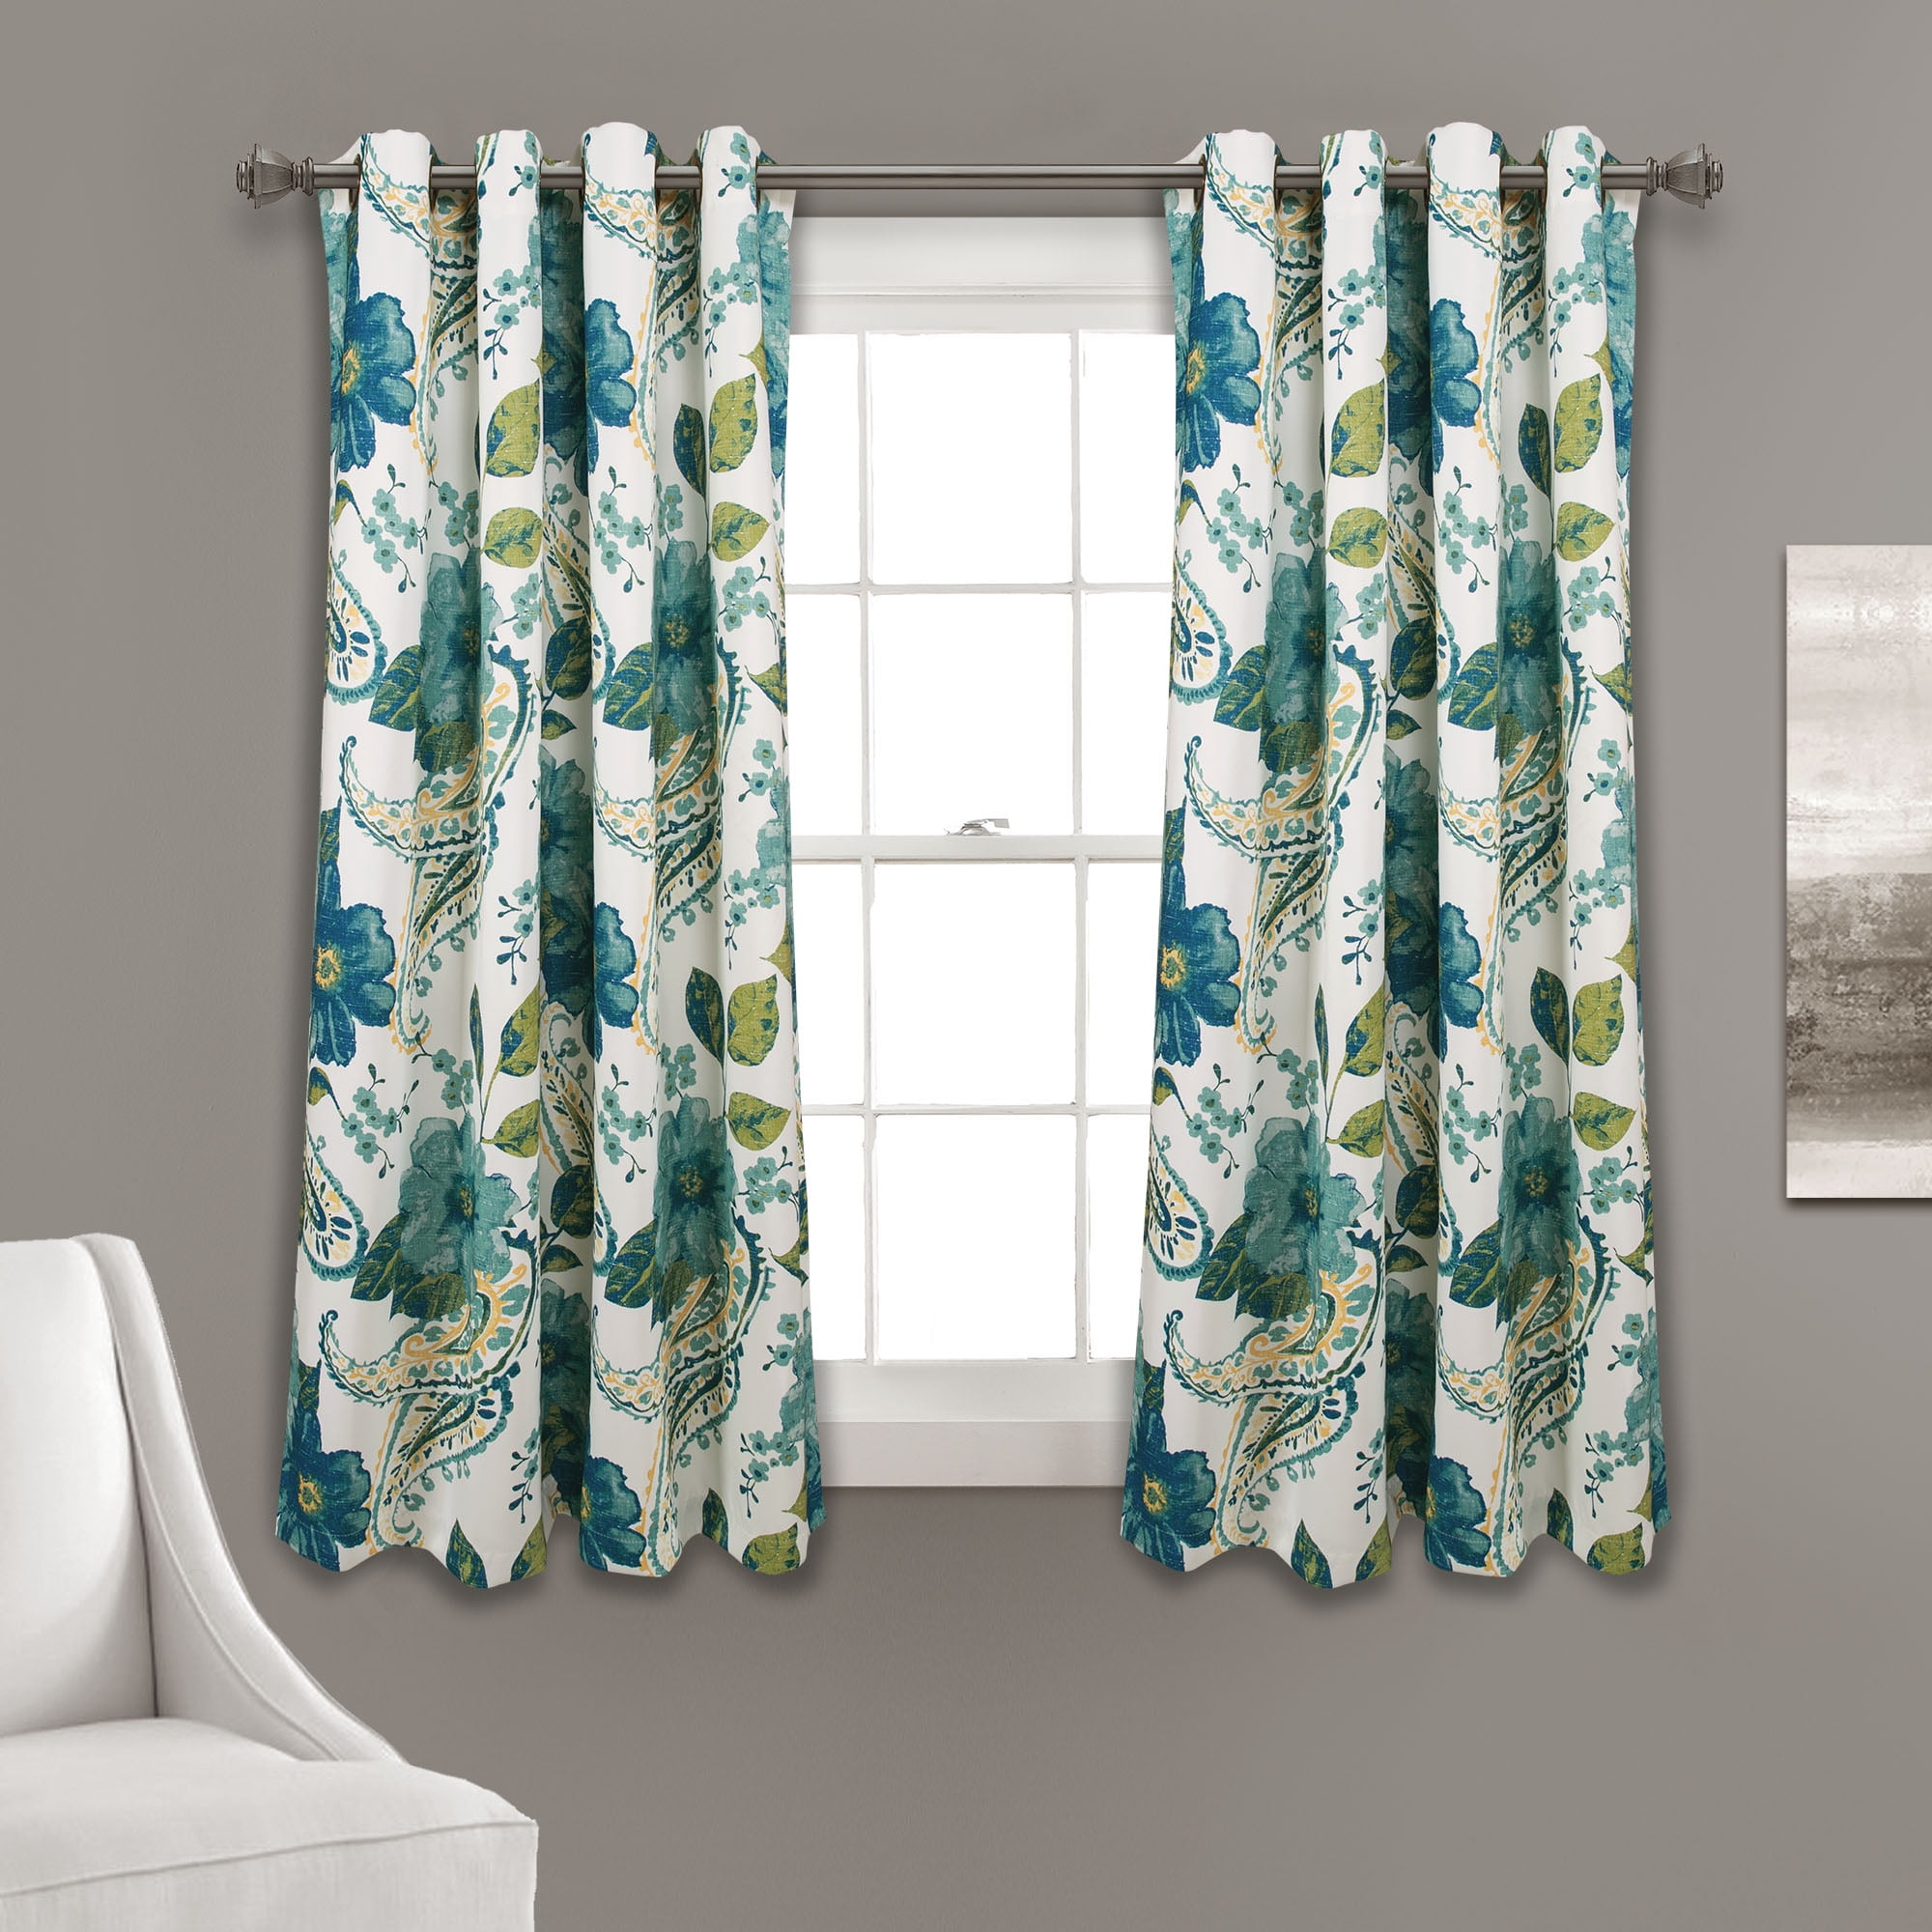 NEW Pure Color Gauze Door Window Curtain  Print Floral For Living Room Bedroom O 